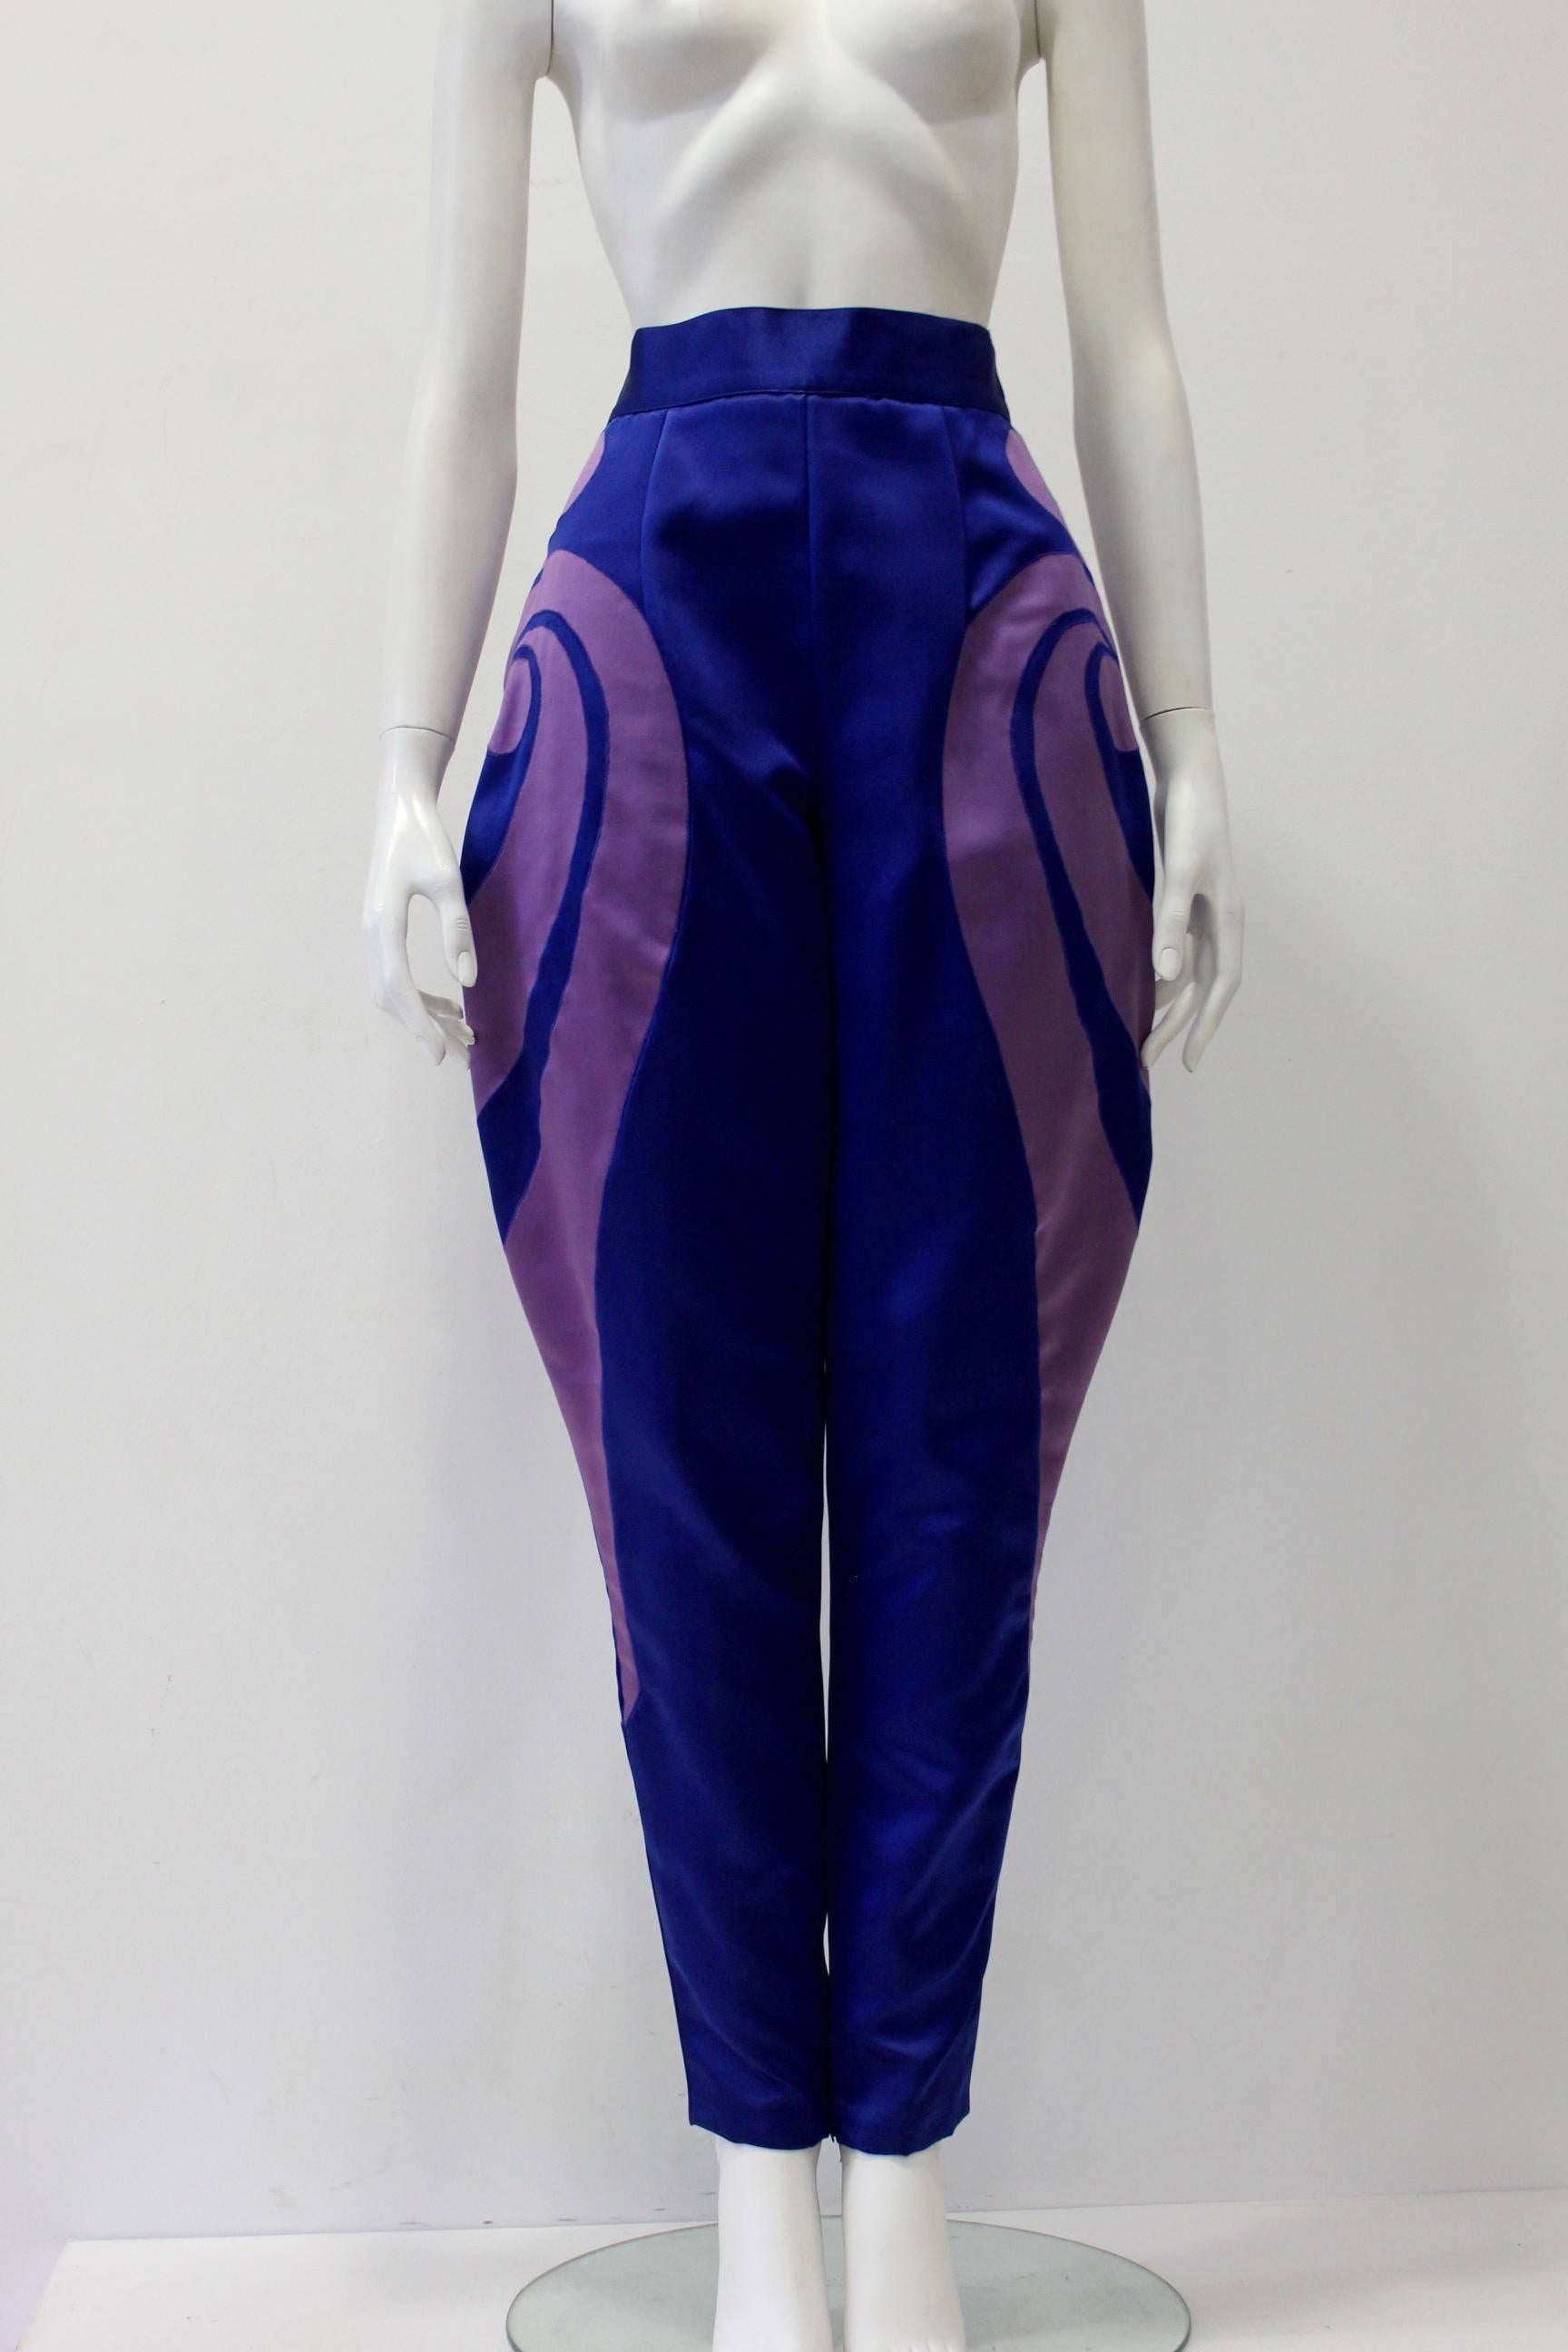 One Of A Kind Gianni Versace Silk Applique Jodhpurs Spring 1990. As Shown In The Show Of Spring-Summer 1990 Worn With Chain Metal Blouse. It Is A Fascinating Outfit Even For Red Carpet Presentation.